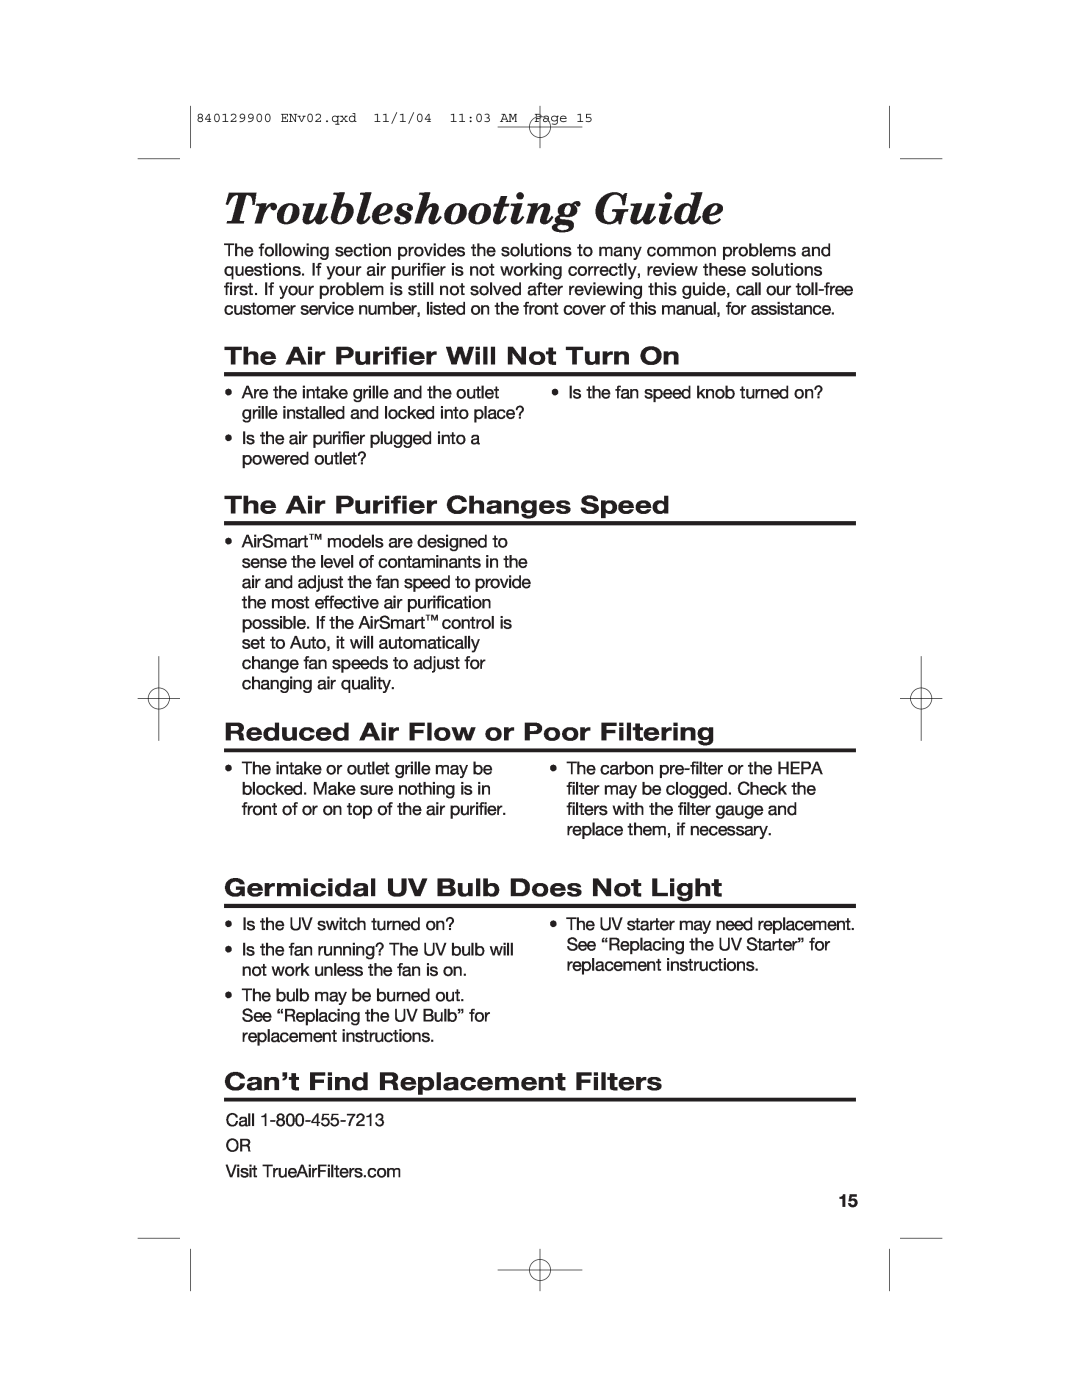 Hamilton Beach 04162, 04160, 04161 Troubleshooting Guide, The Air Purifier Will Not Turn On, The Air Purifier Changes Speed 